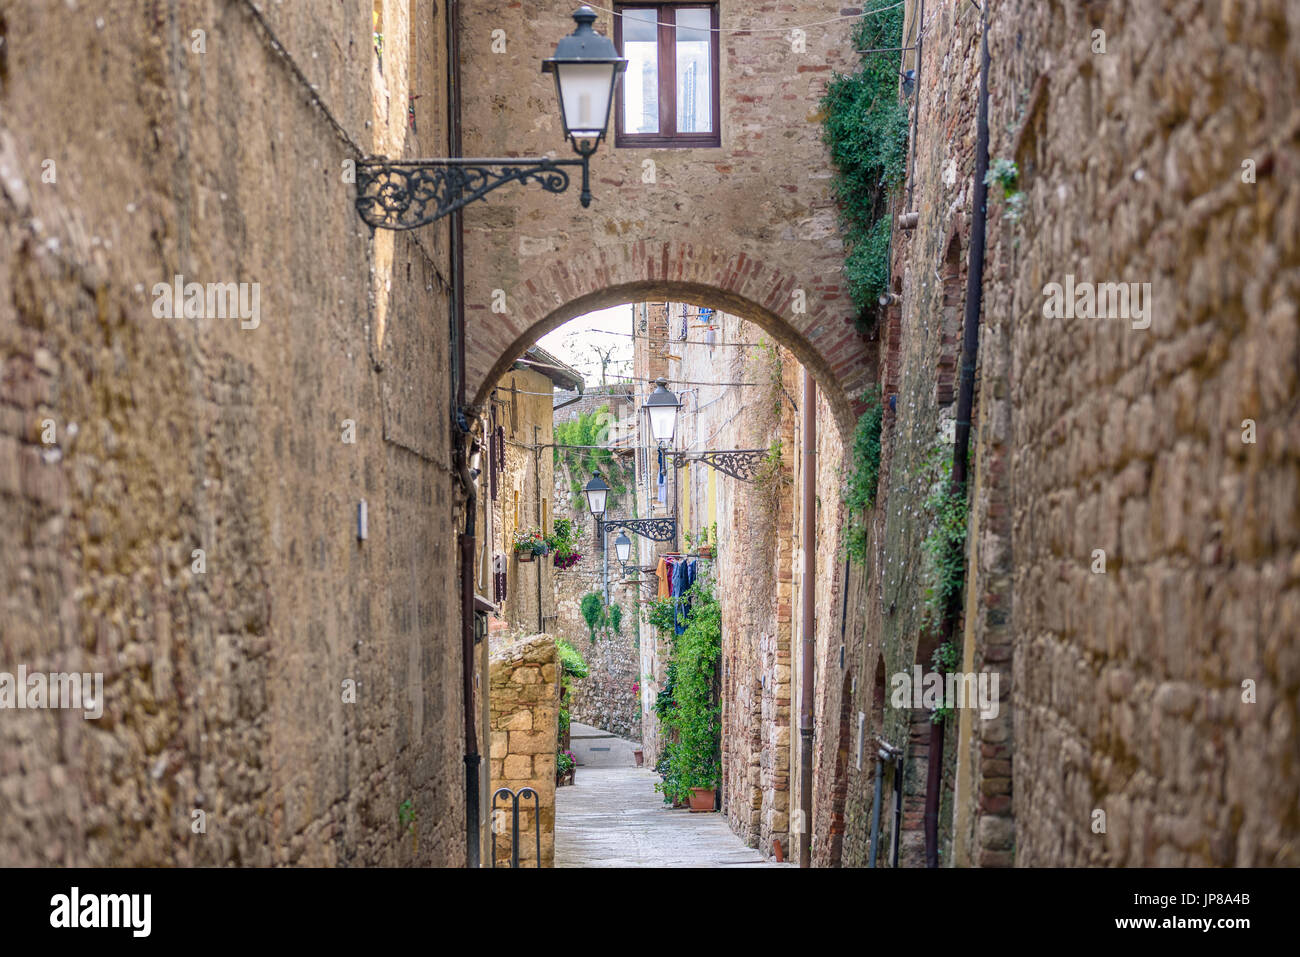 View of an alley in the historic district of Colle Val d'Elsa a small town near Siena in Tuscany Stock Photo